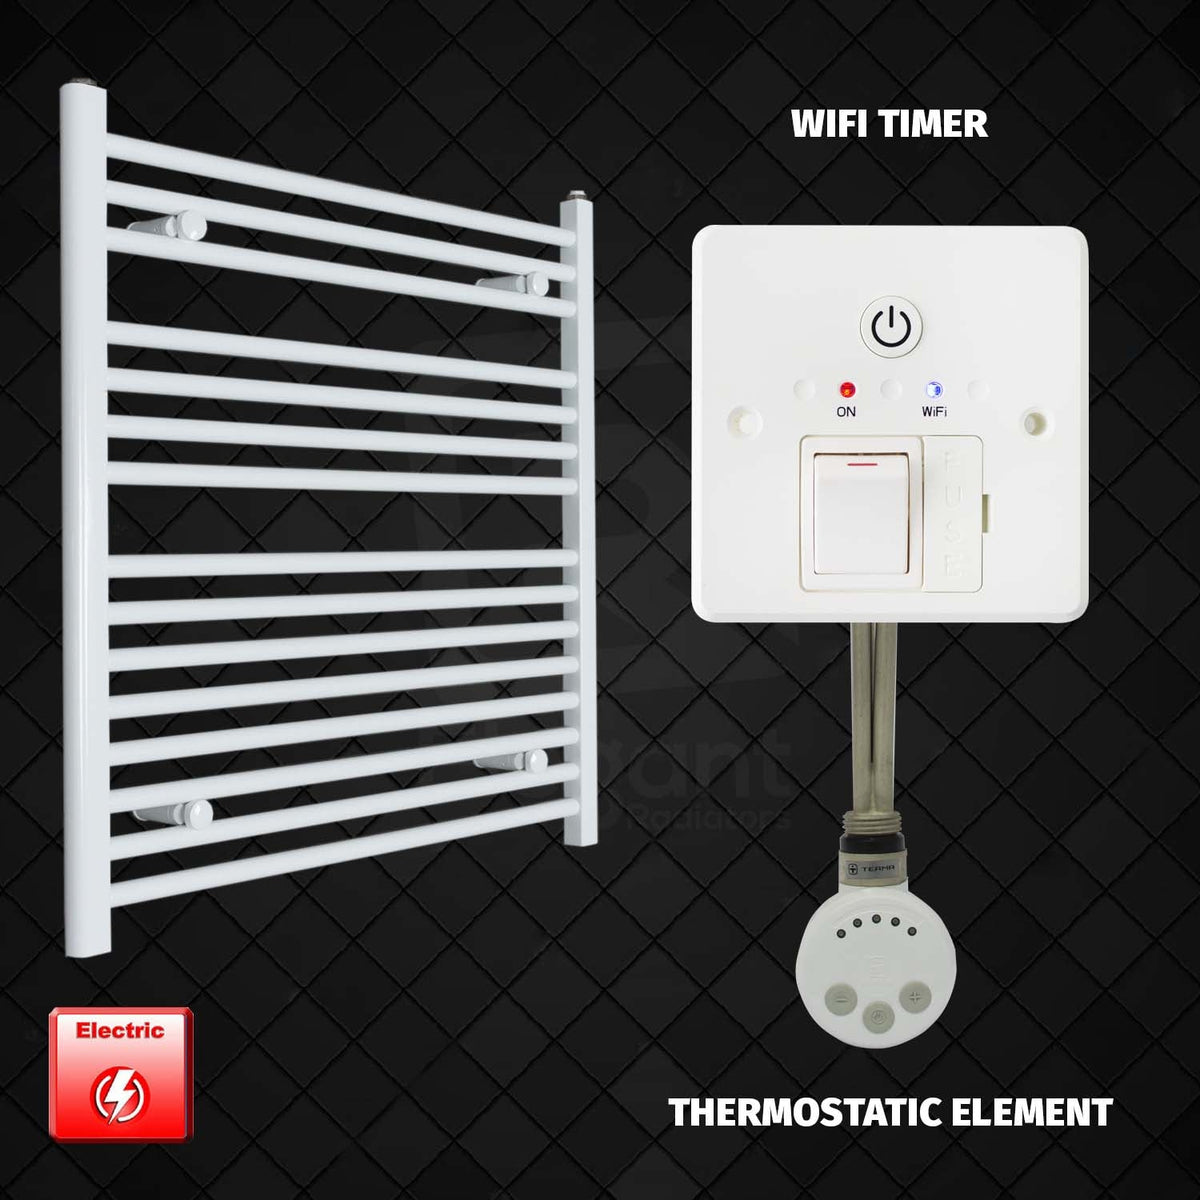 800 x 900 Pre-Filled Electric Heated Towel Radiator White HTR MOA Thermostatic element Wifi timer